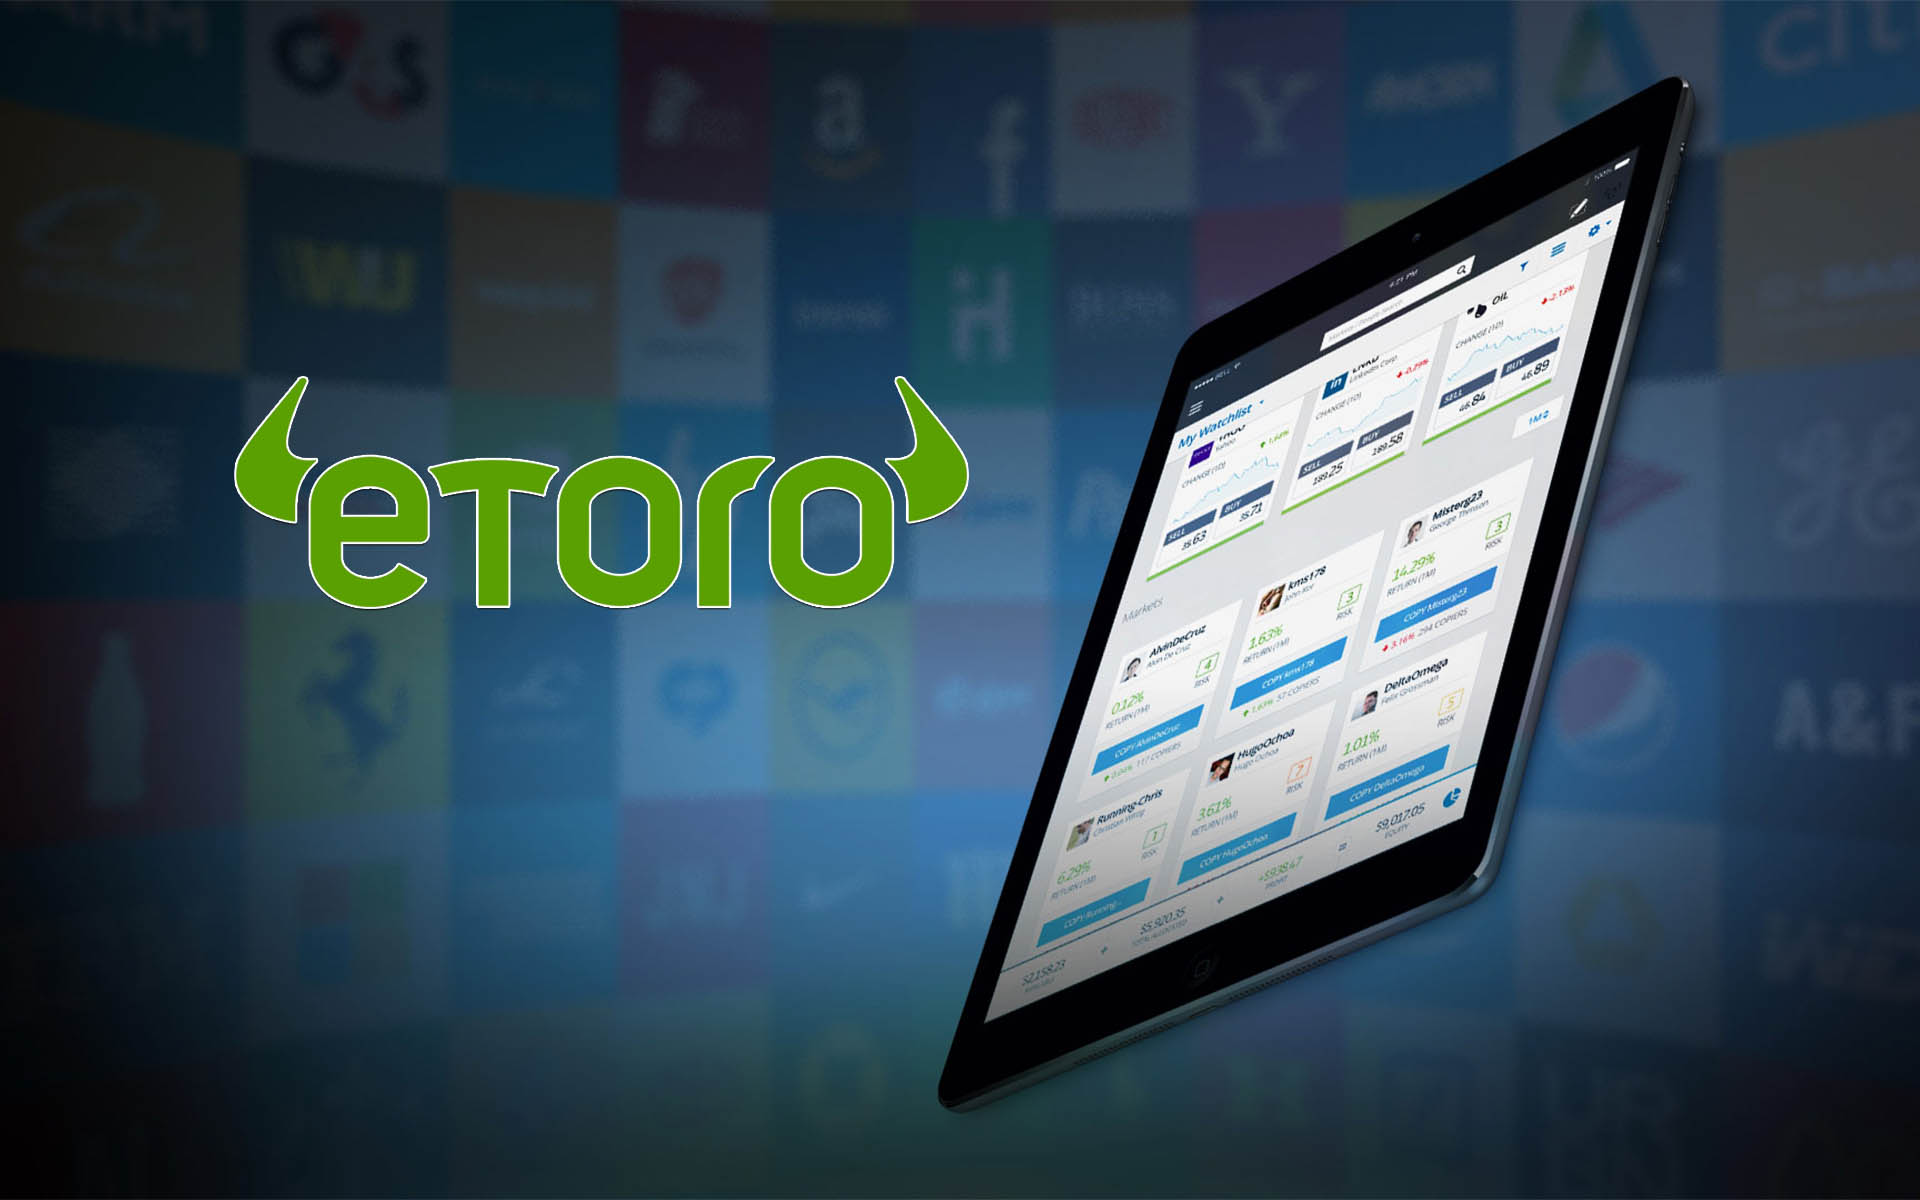 eToro cuts exchange fees to club tiers above PLATINUM and pays balance interest to Platinum+ and Diamond clients